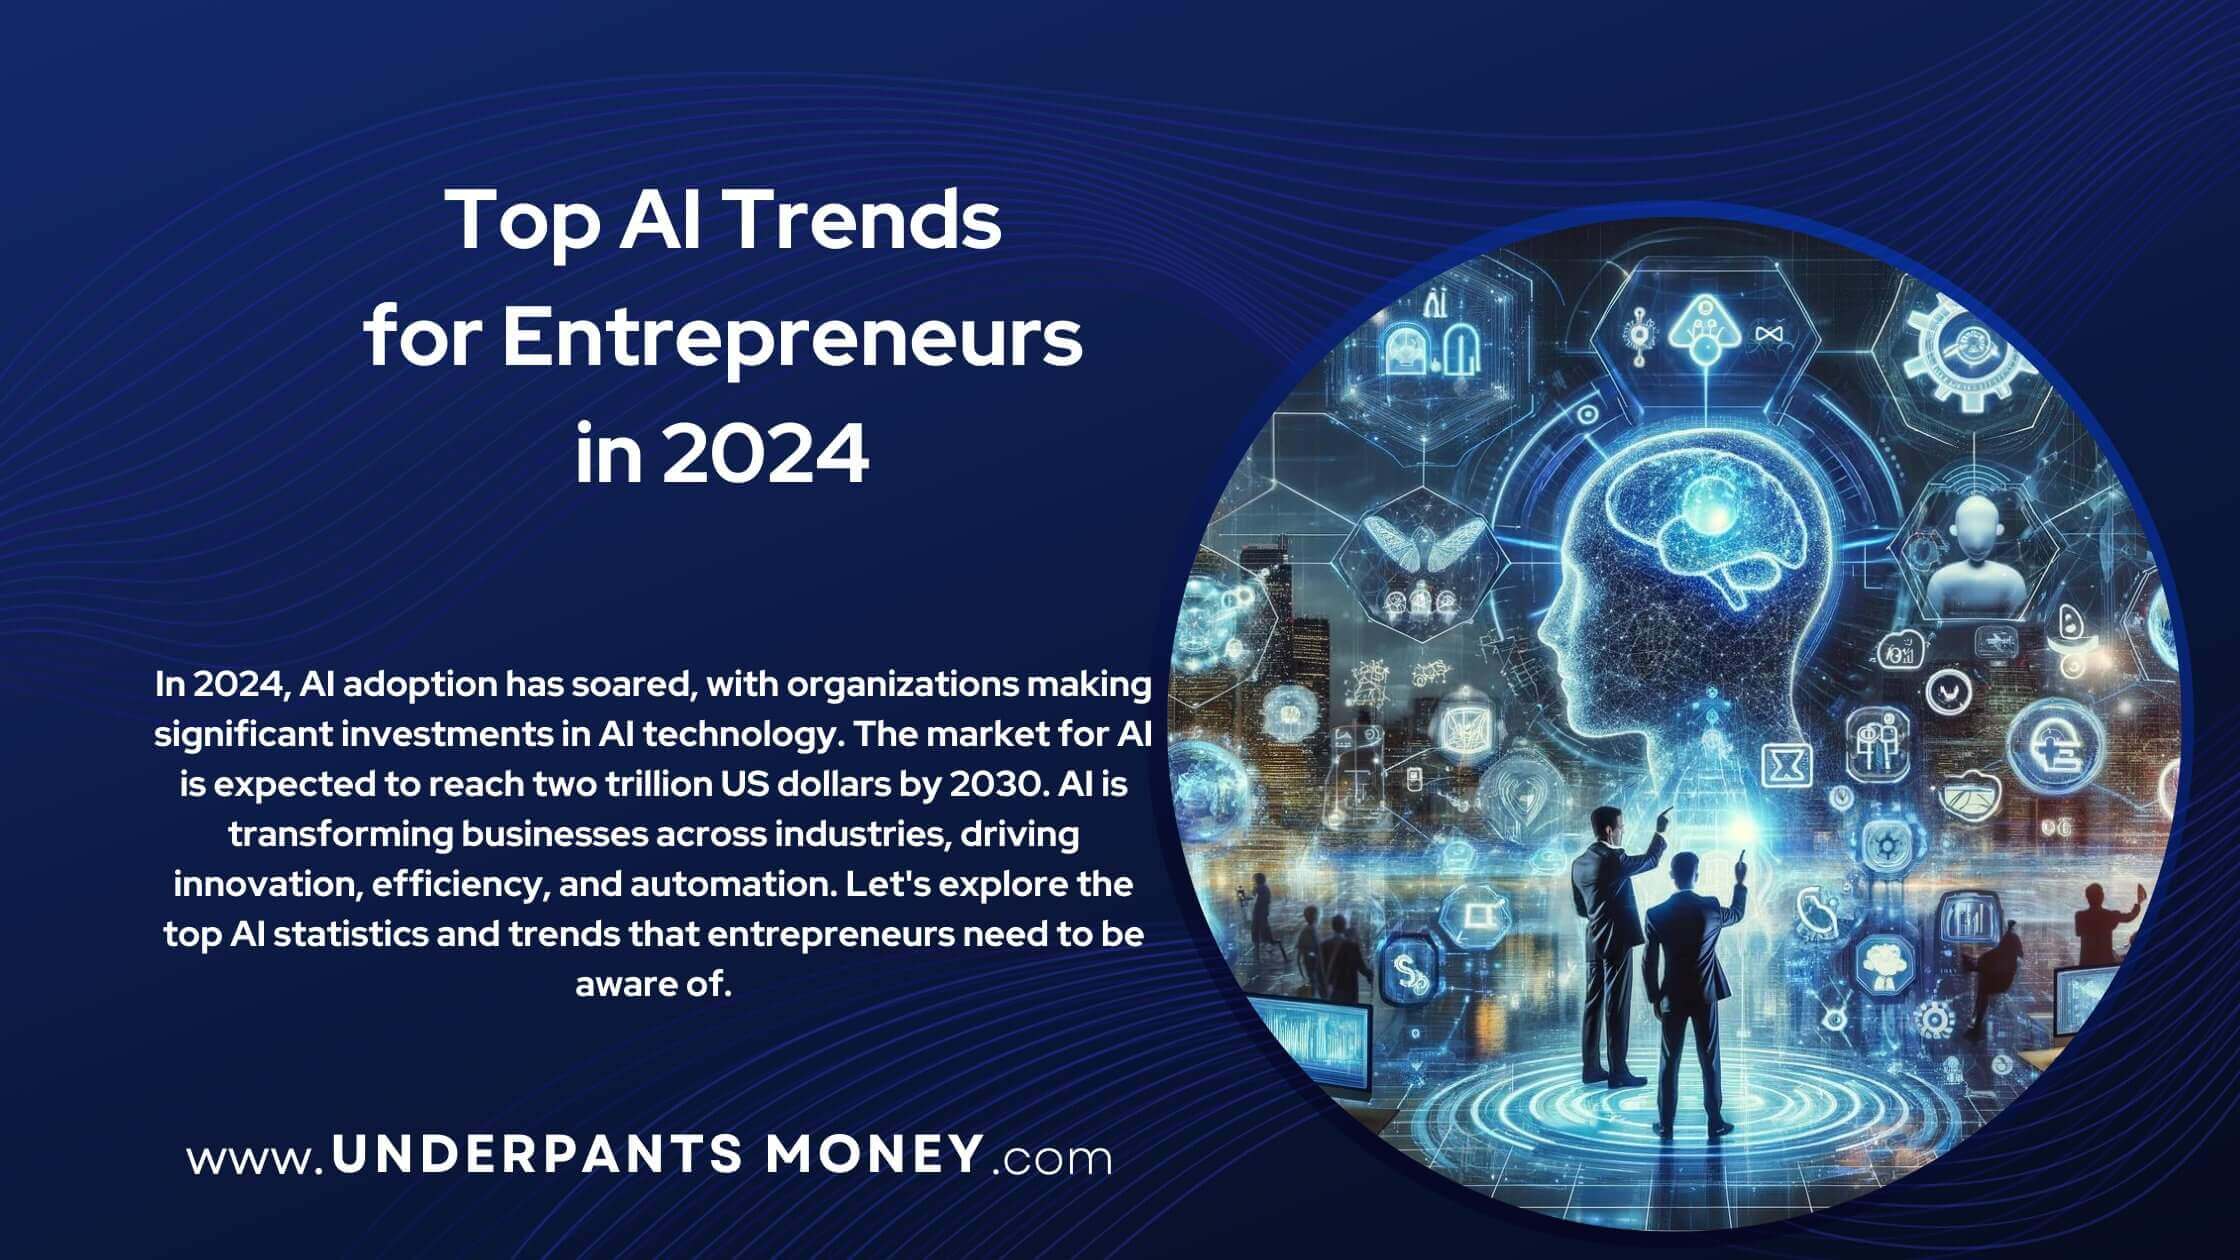 Top Ai trends for entrepreneurs title and description on blue with image of people looking towards an AI for upcoming trends